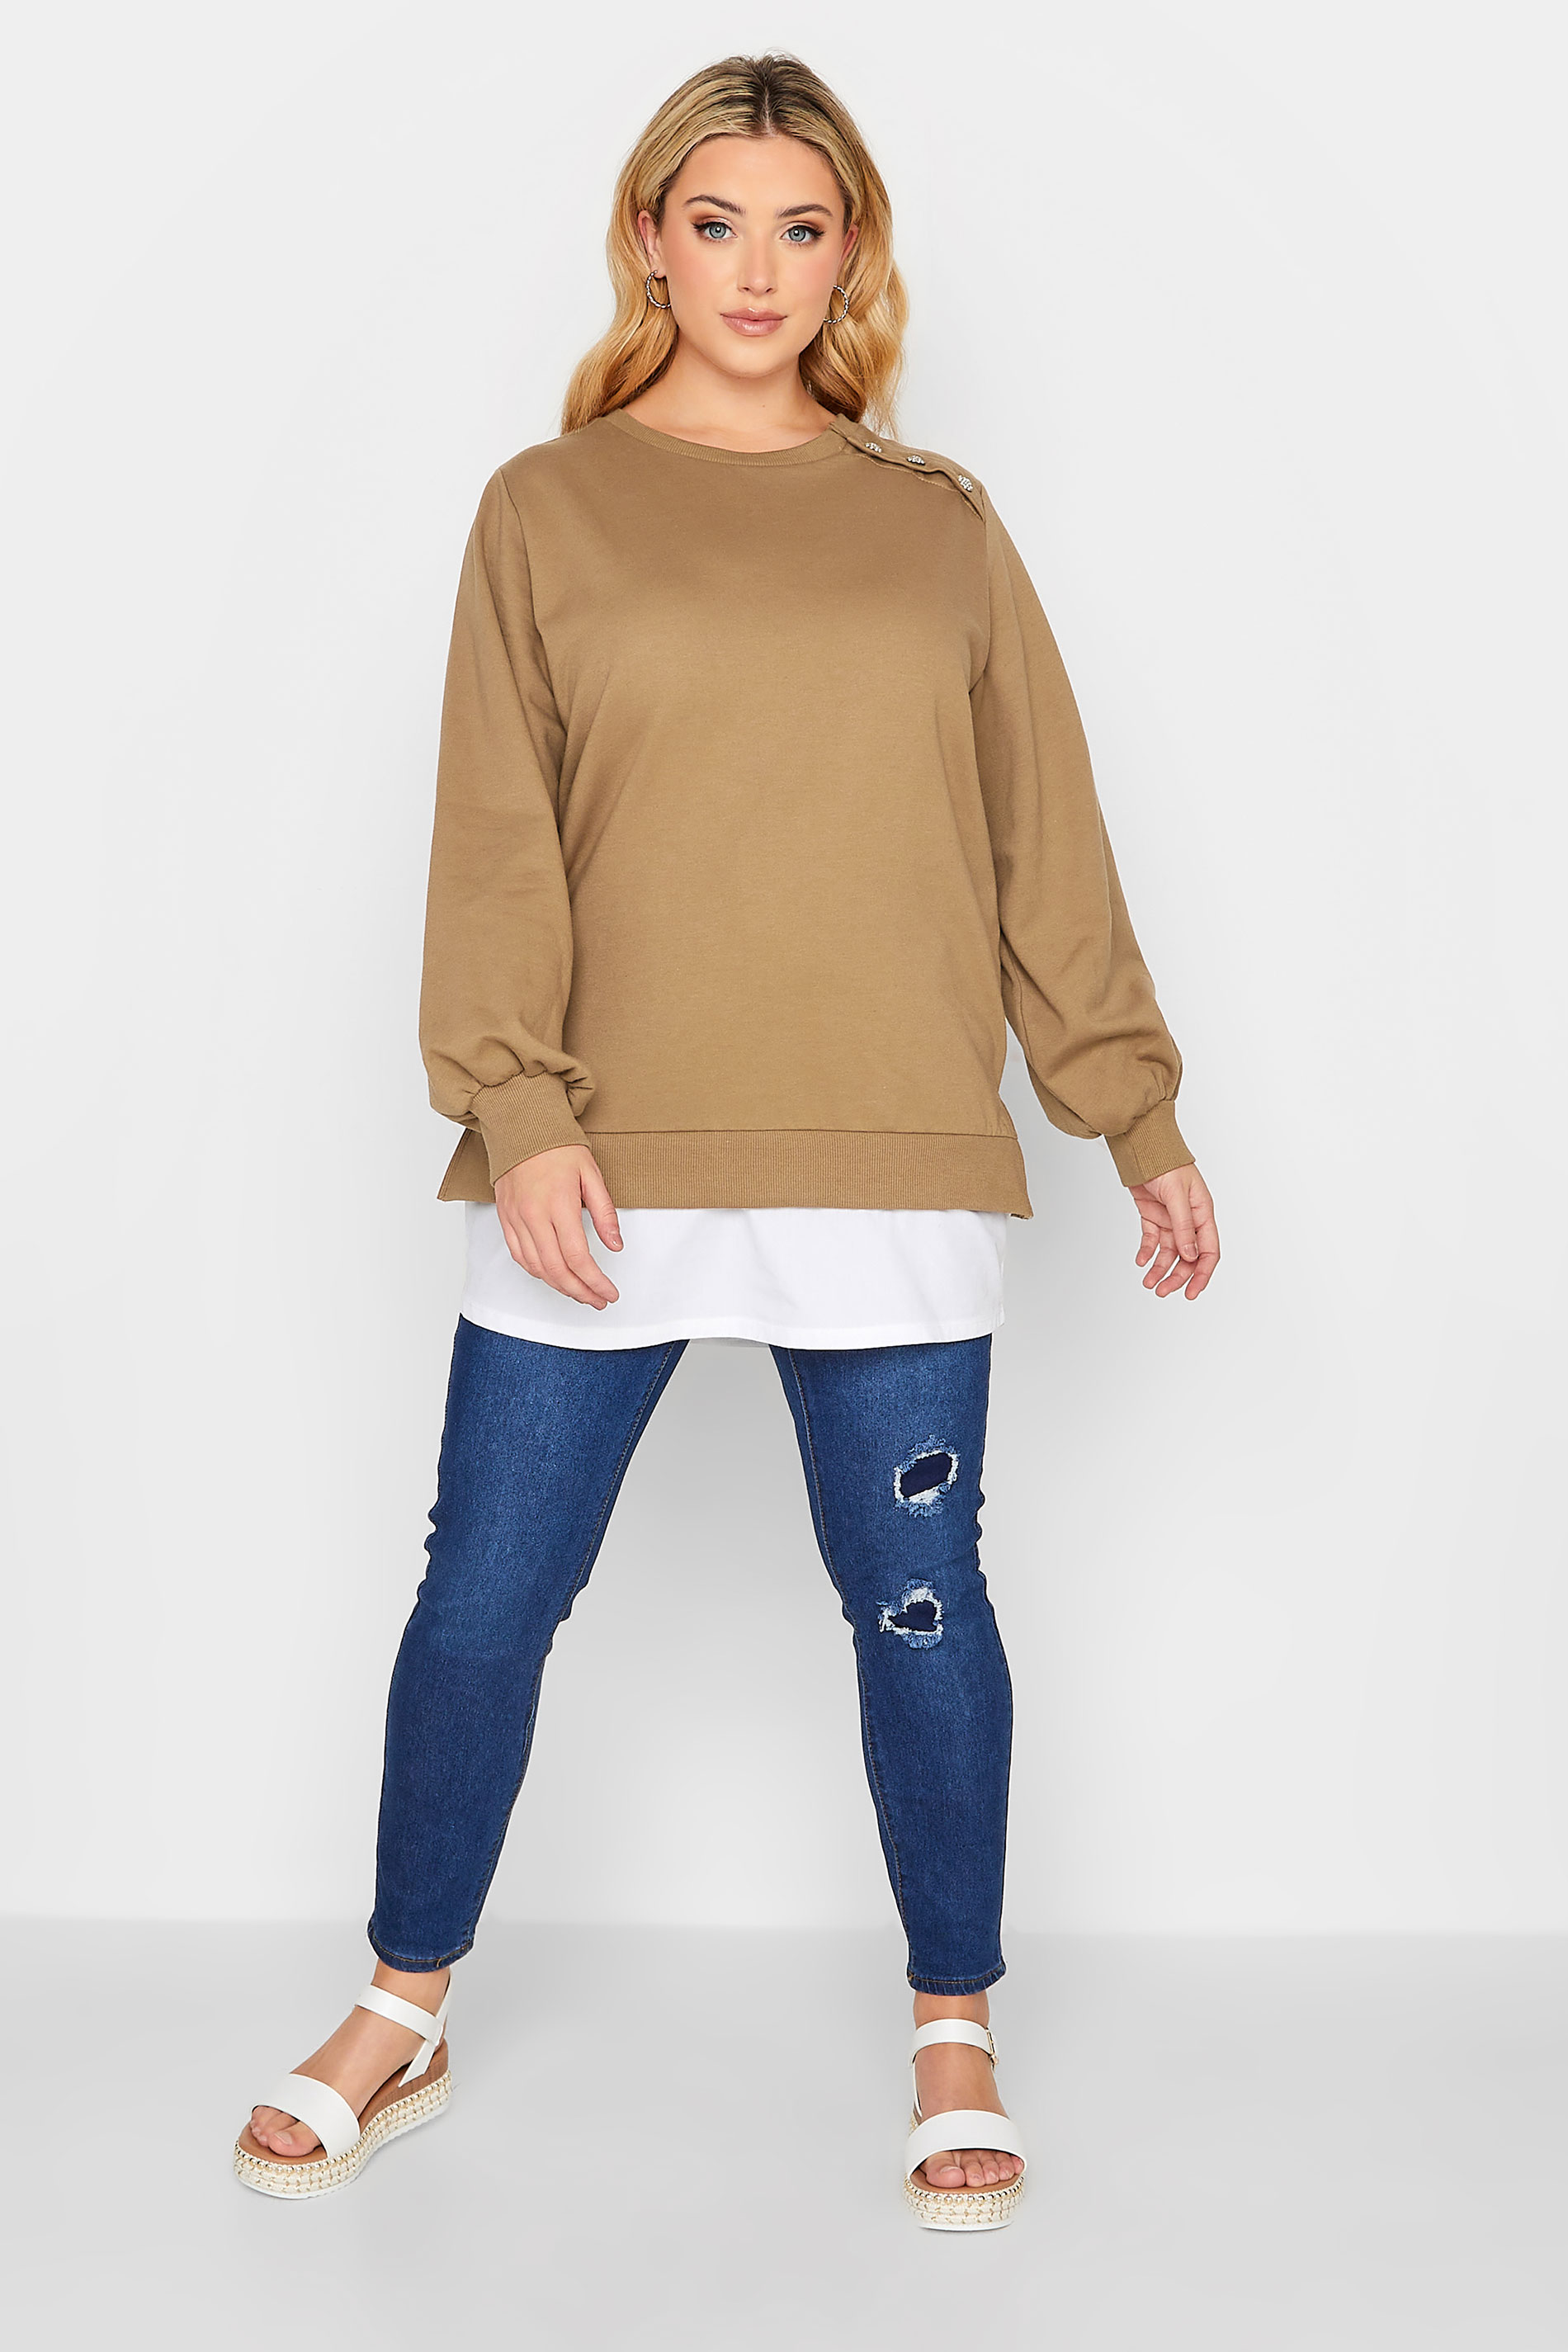 Curve Plus Size Brown Button Long Sleeve Sweatshirt | Yours Clothing  2